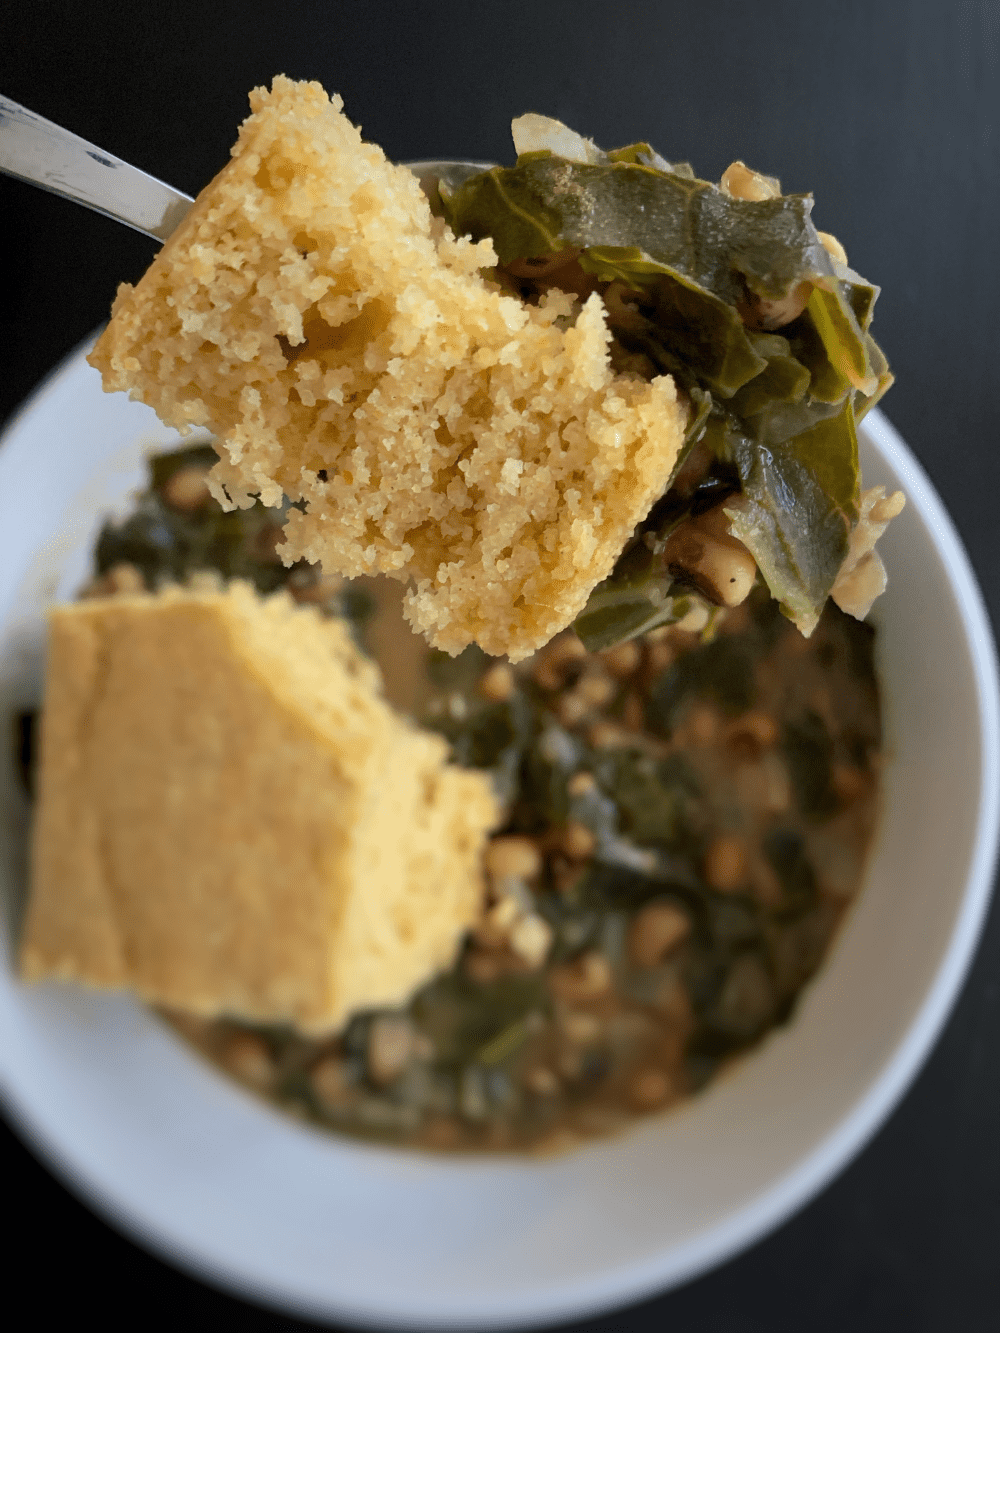 Melt-in-your-mouth textures with a smoky heat and low calorie density makes these Braised Greens & Beans well worth the cook time!